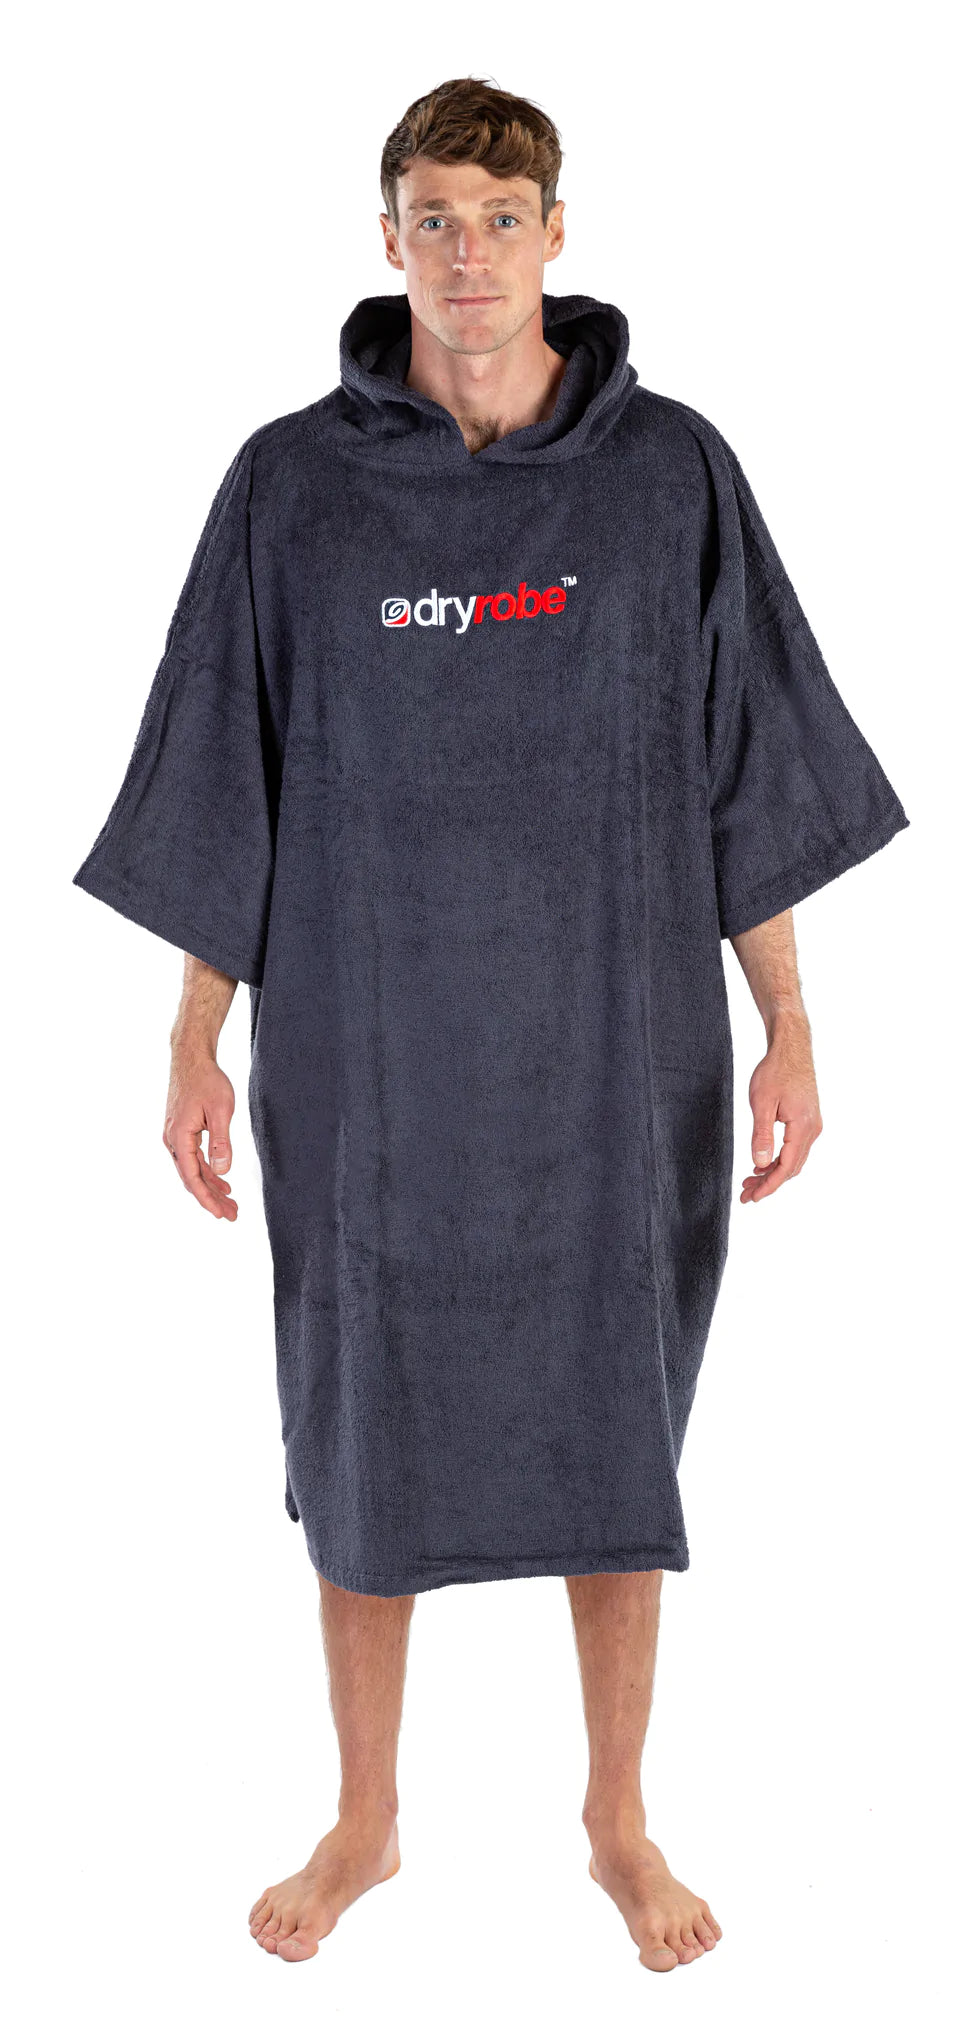 Dryrobe Organic Towel - Adult - Available instore only.